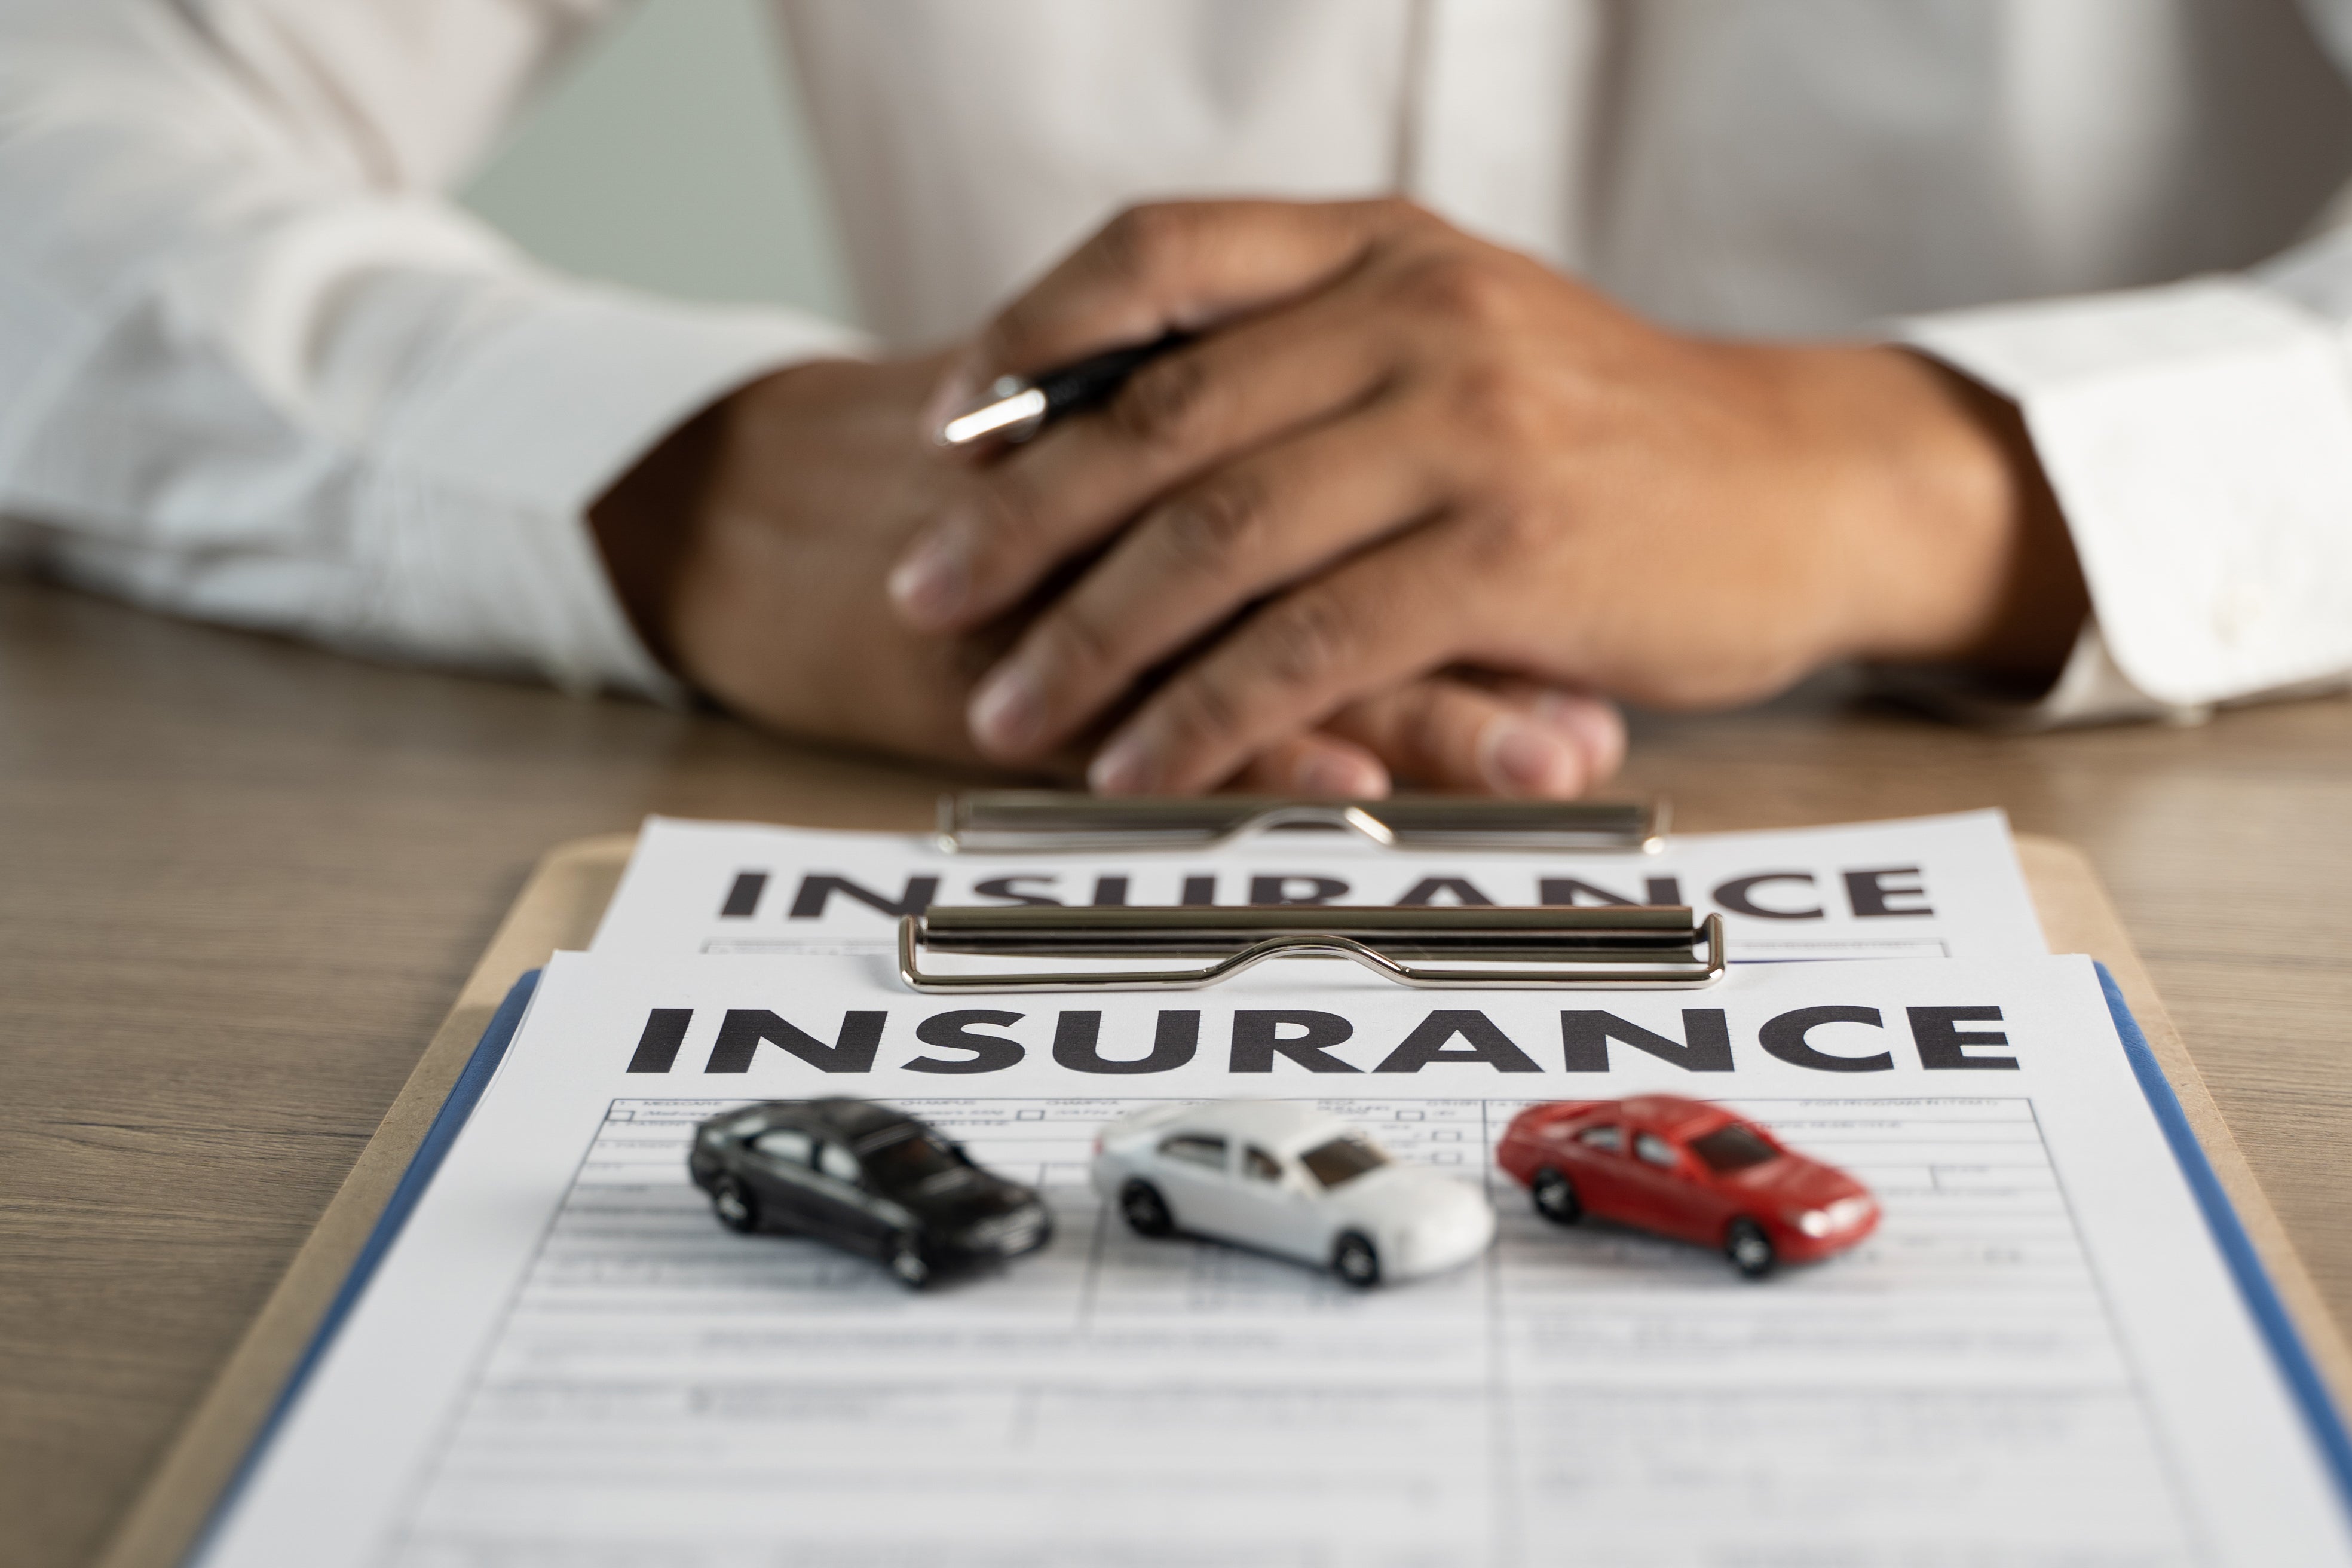 car insurance prices could finally drop under new strategy